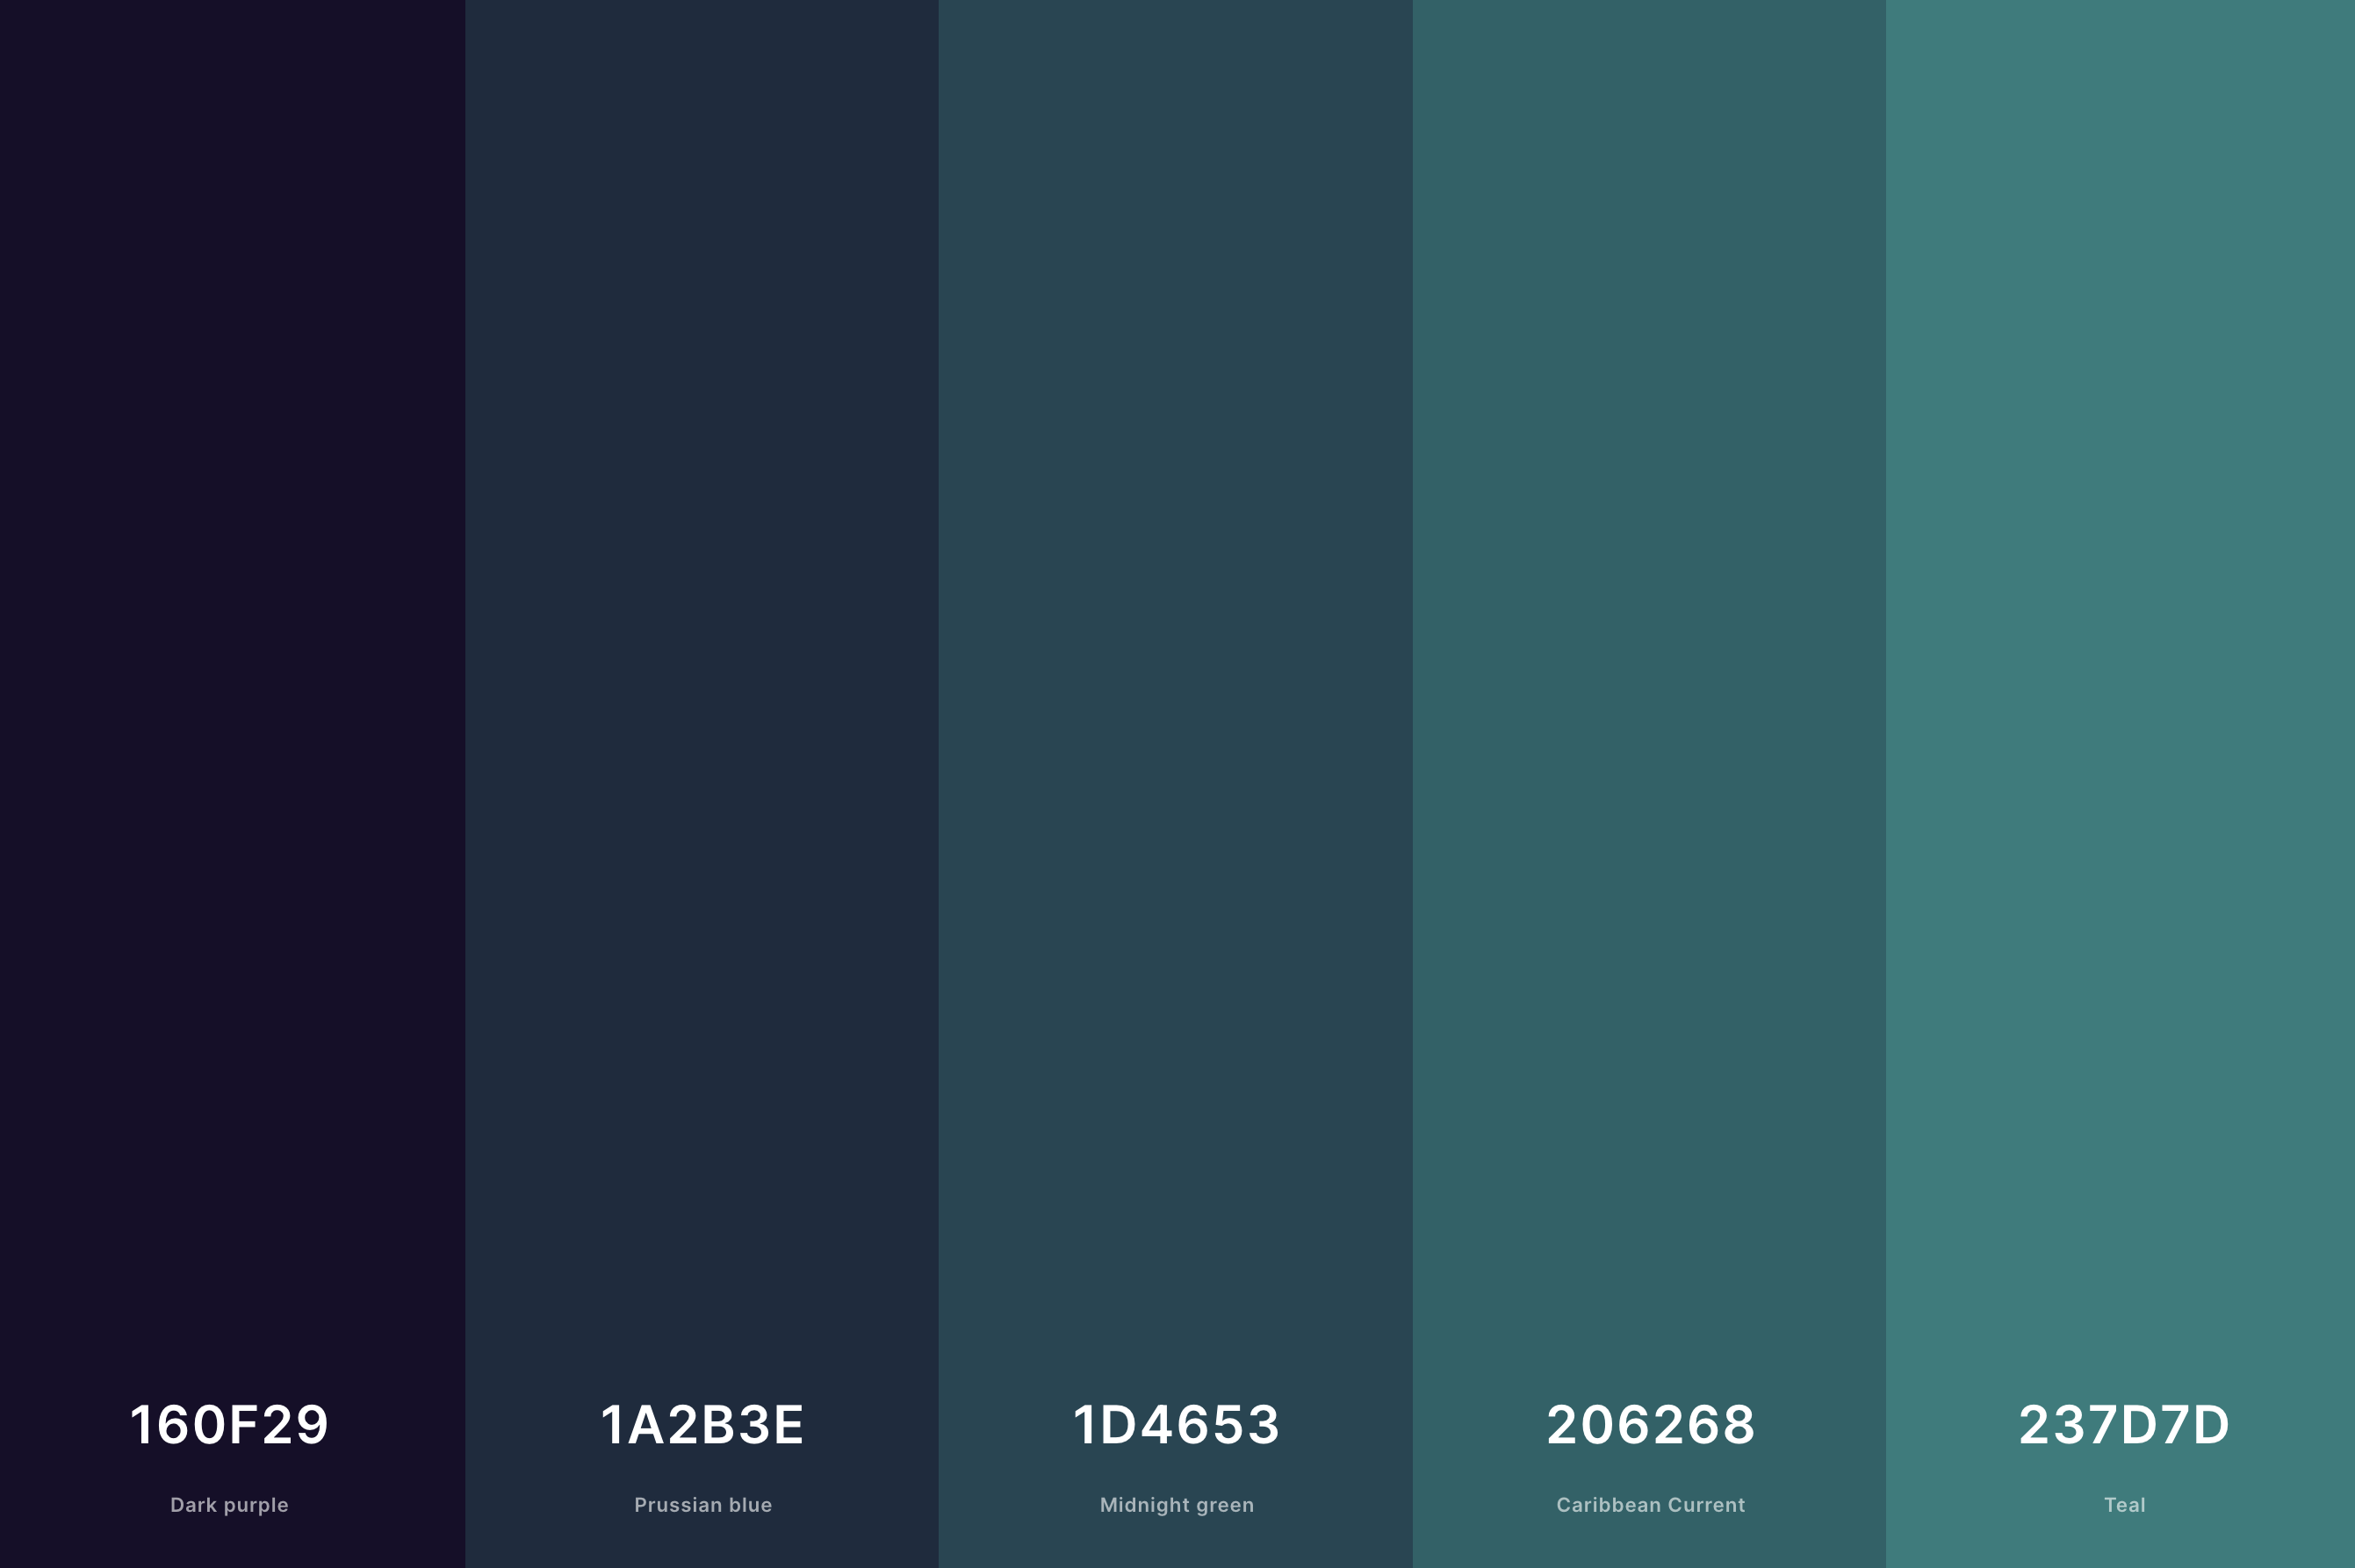 4. Dark Turquoise Color Palette Color Palette with Dark Purple (Hex #160F29) + Prussian Blue (Hex #1A2B3E) + Midnight Green (Hex #1D4653) + Caribbean Current (Hex #206268) + Teal (Hex #237D7D) Color Palette with Hex Codes